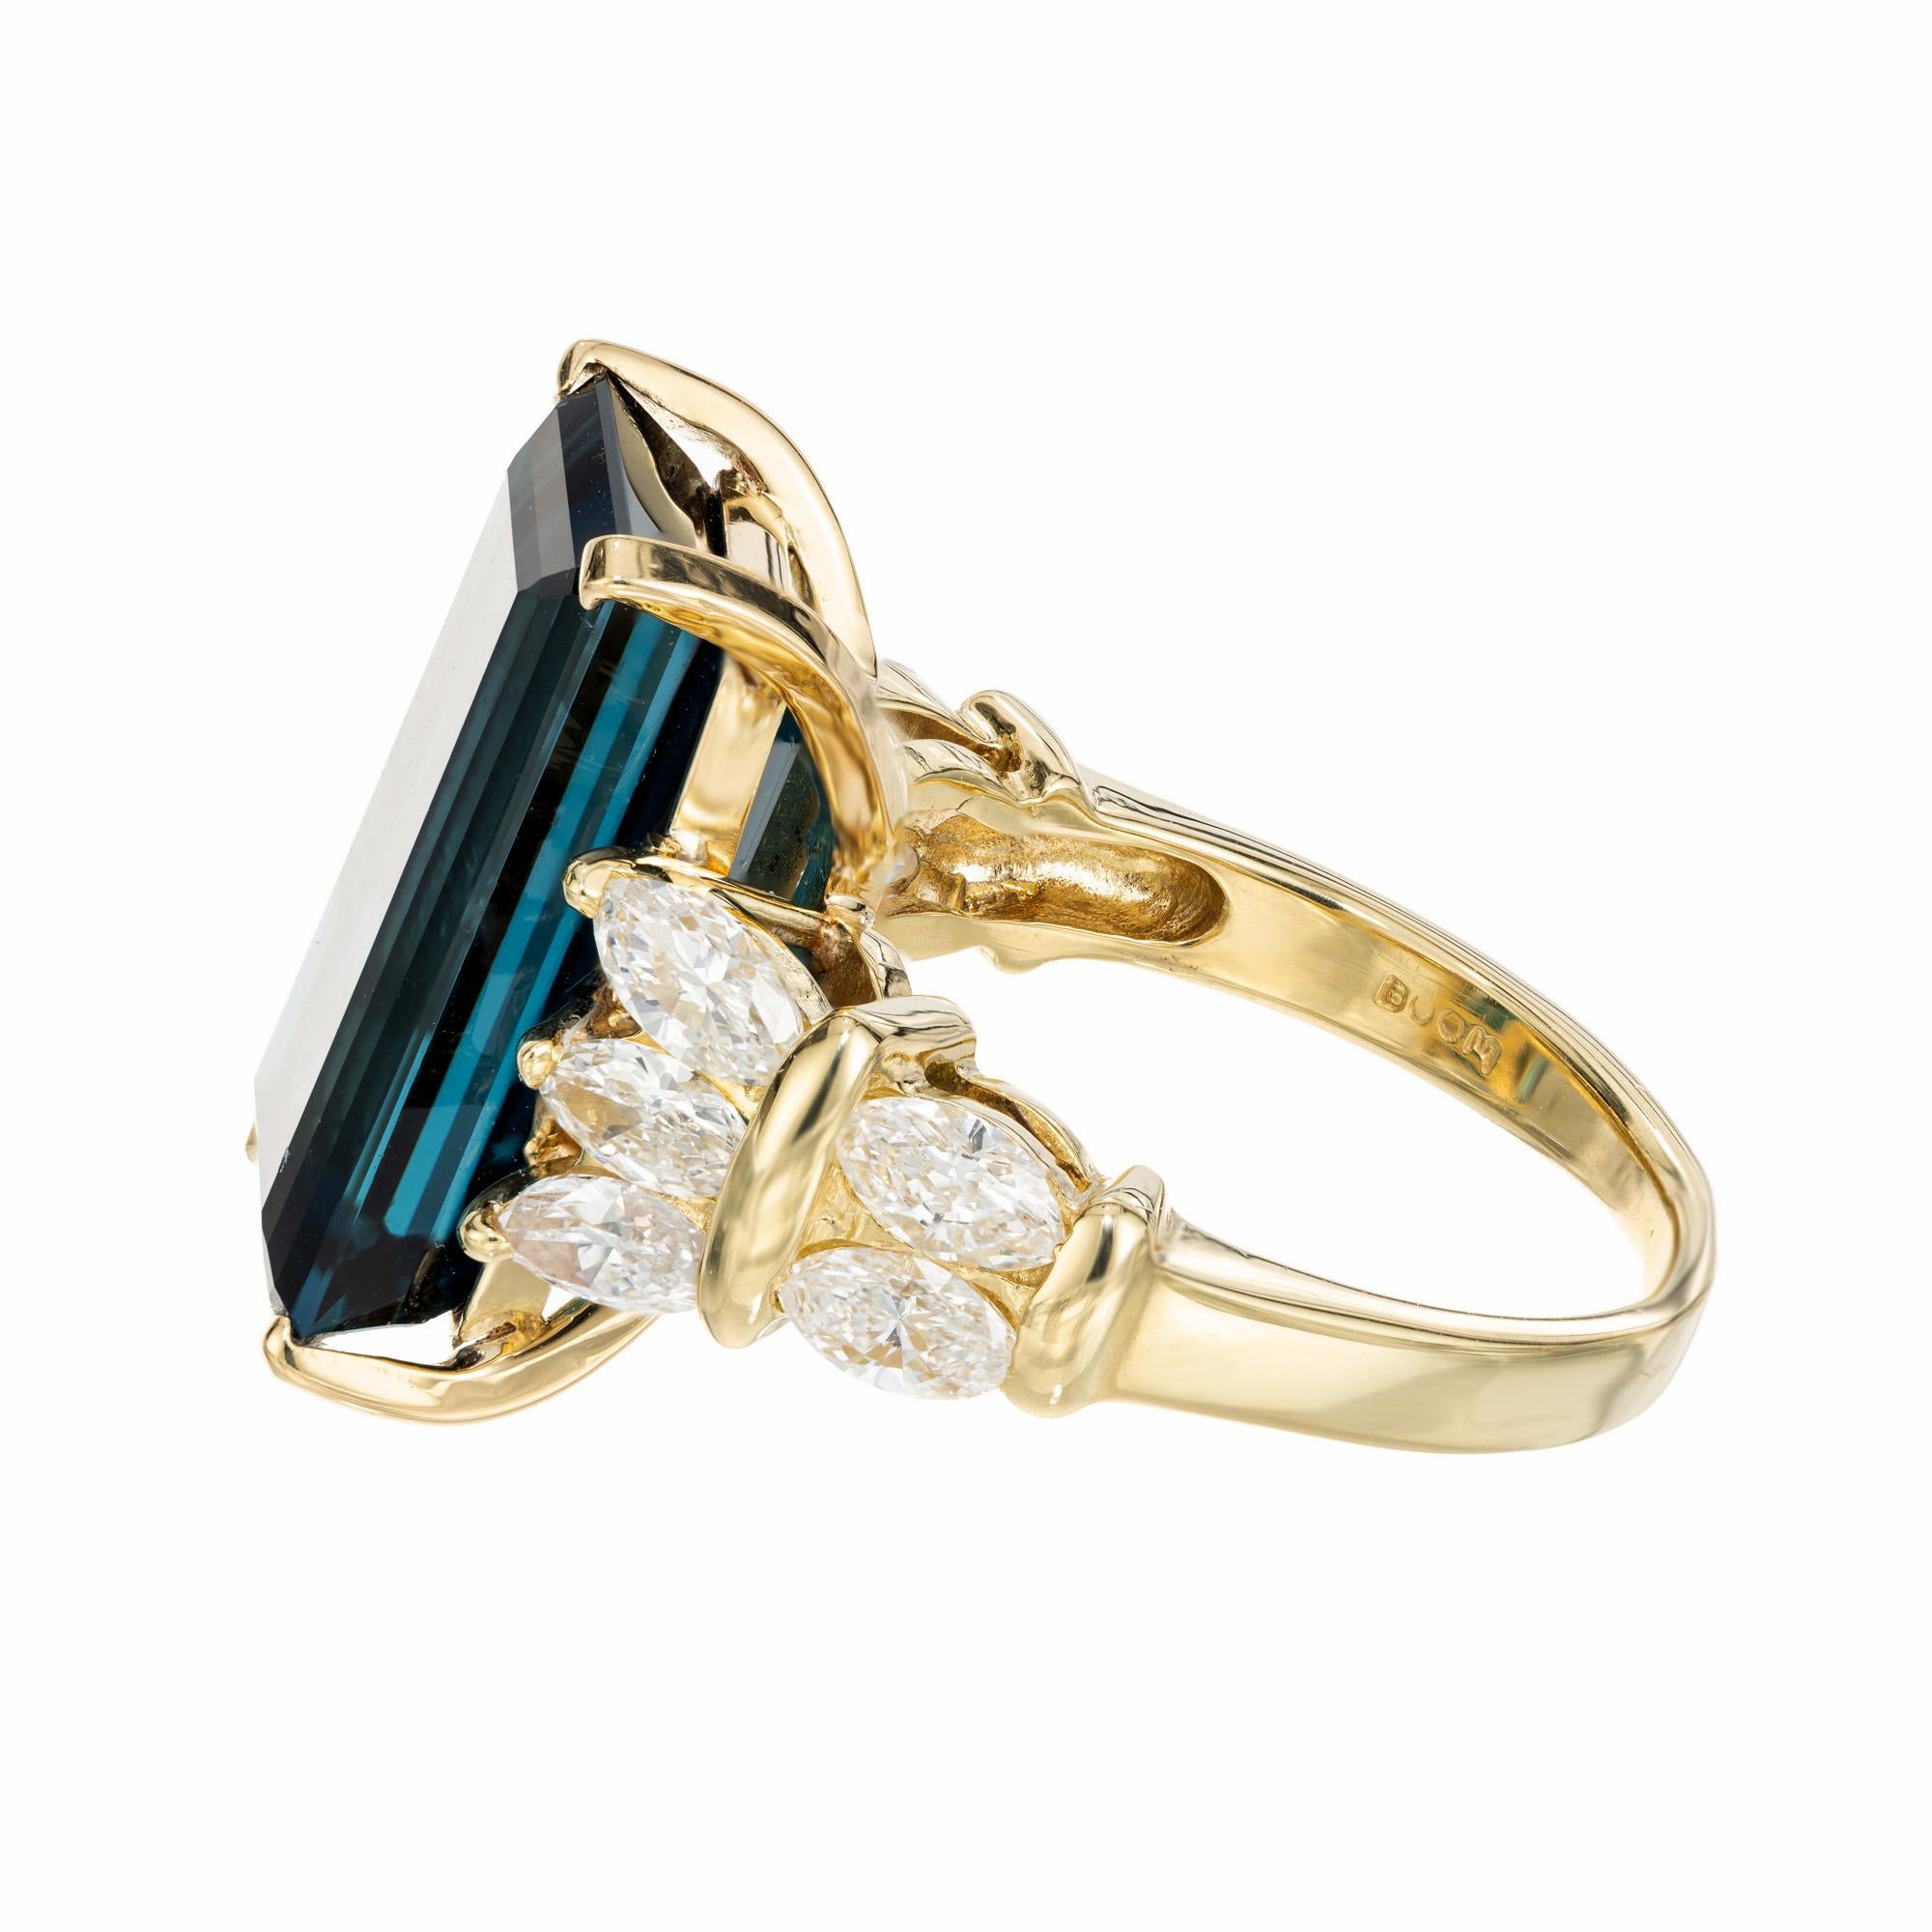 8.55 Carat Blue Indicolite Tourmaline Marquise Diamond Gold Cocktail Ring In Good Condition For Sale In Stamford, CT